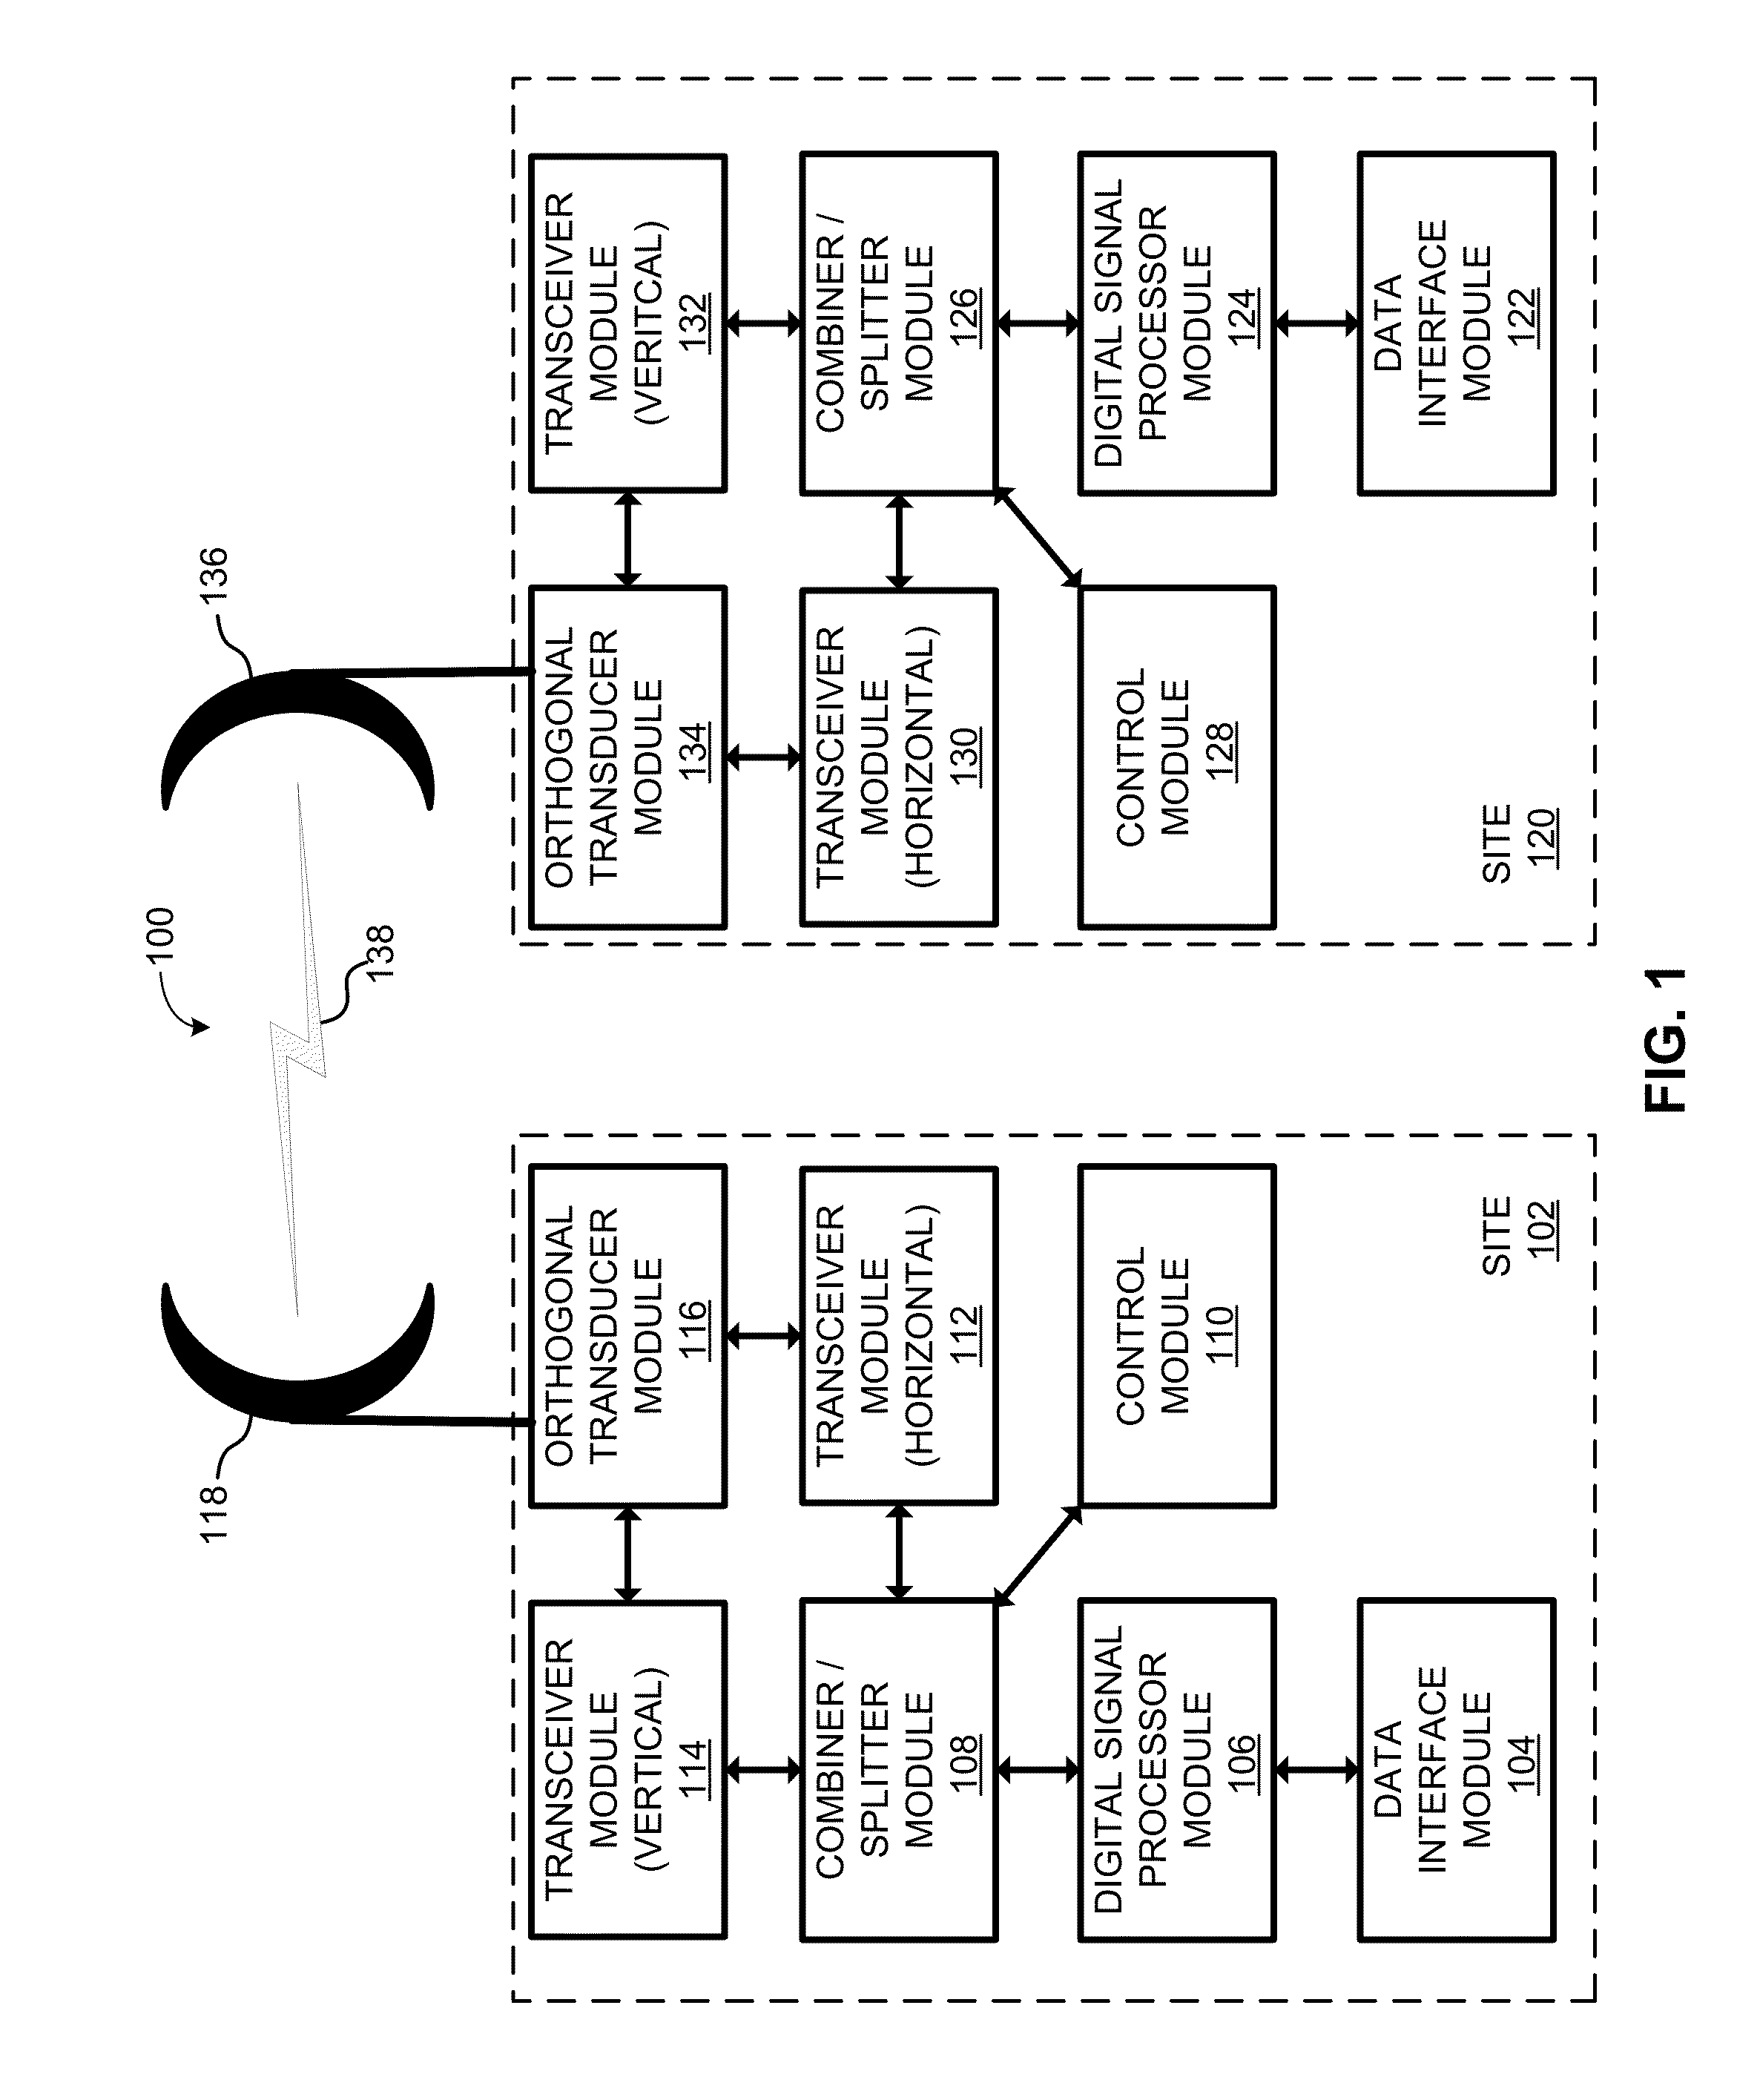 Systems and Methods for Cancelling Cross Polarization Interference in Wireless Communication Using Polarization Diversity